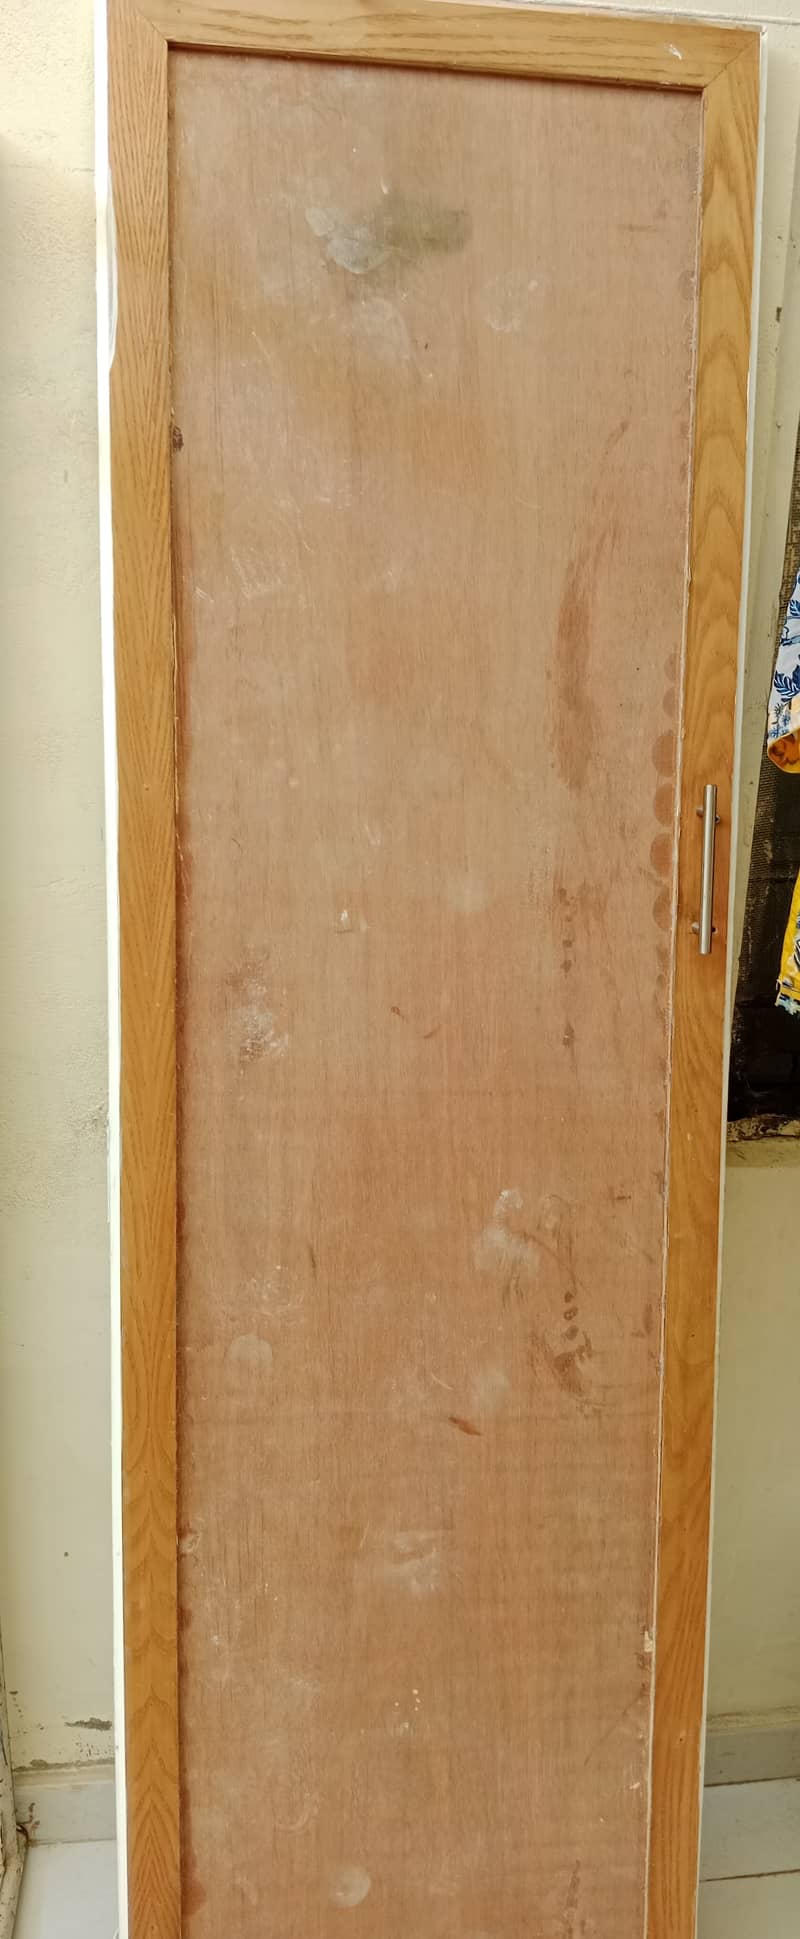 Door for sale neat and clean only WhatsUp 03060103003 8